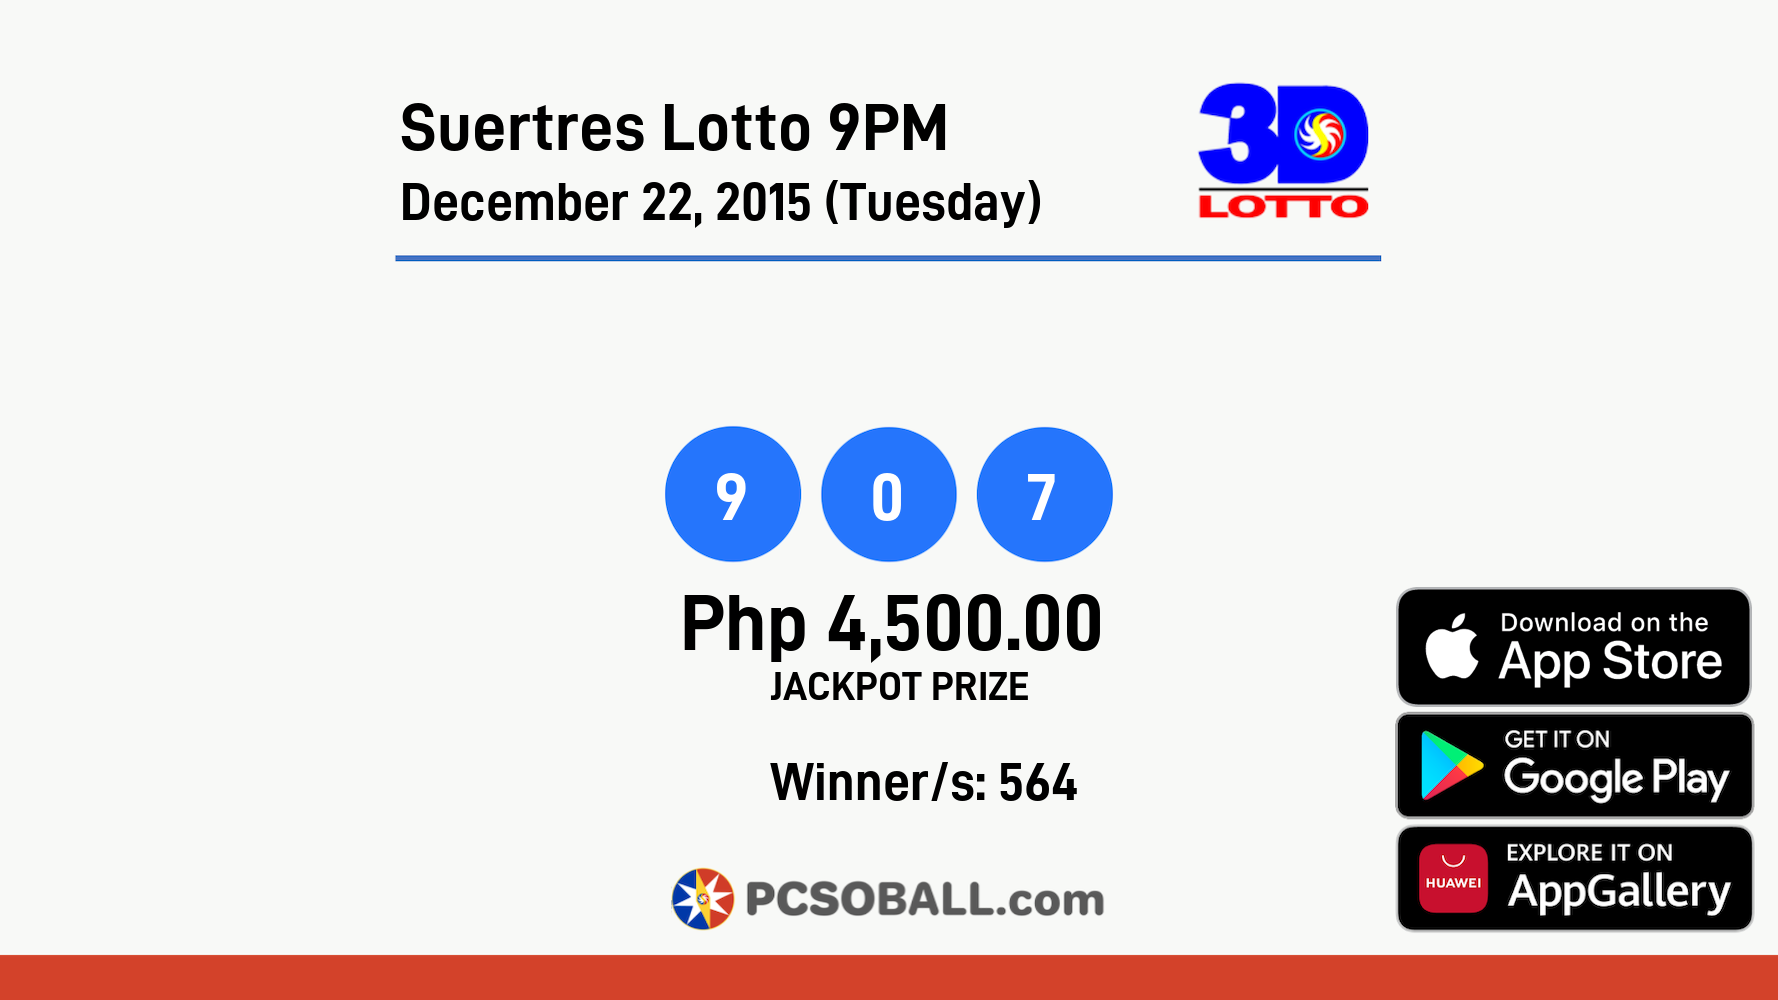 Suertres Lotto 9PM December 22, 2015 (Tuesday) Result